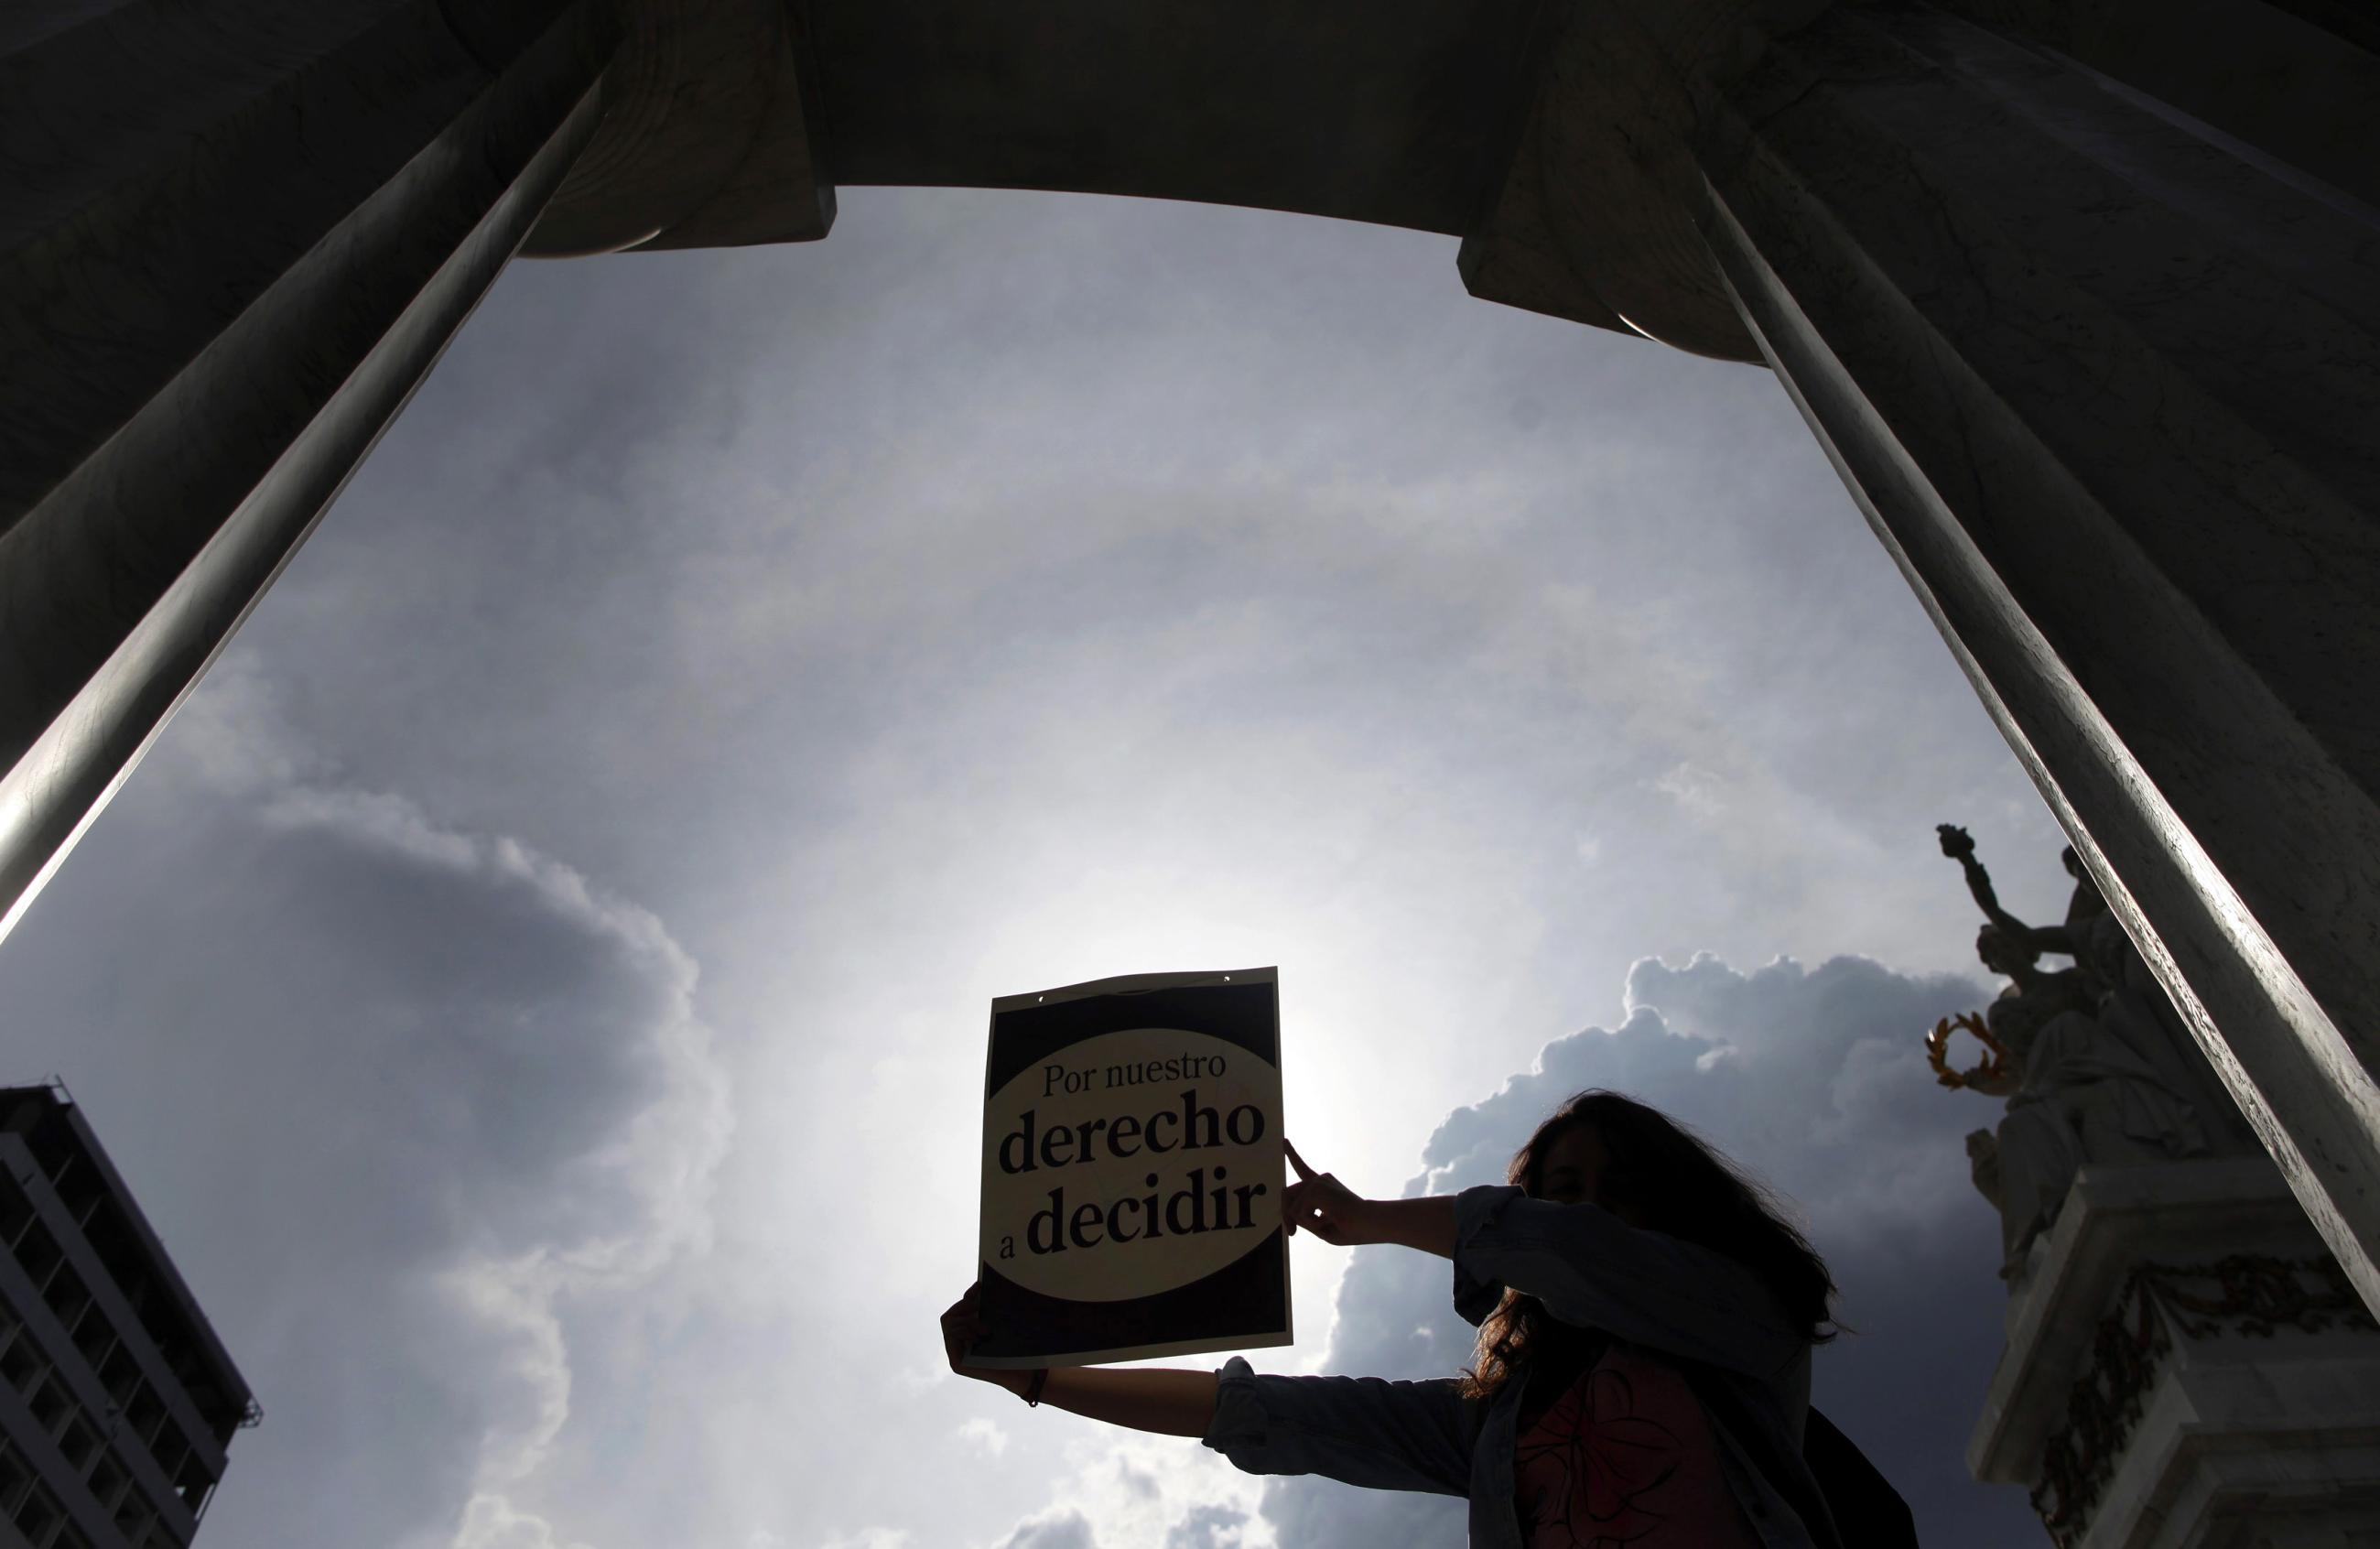 Activist holds up poster that reads, "For our right to decide", during demonstration in Mexico City.